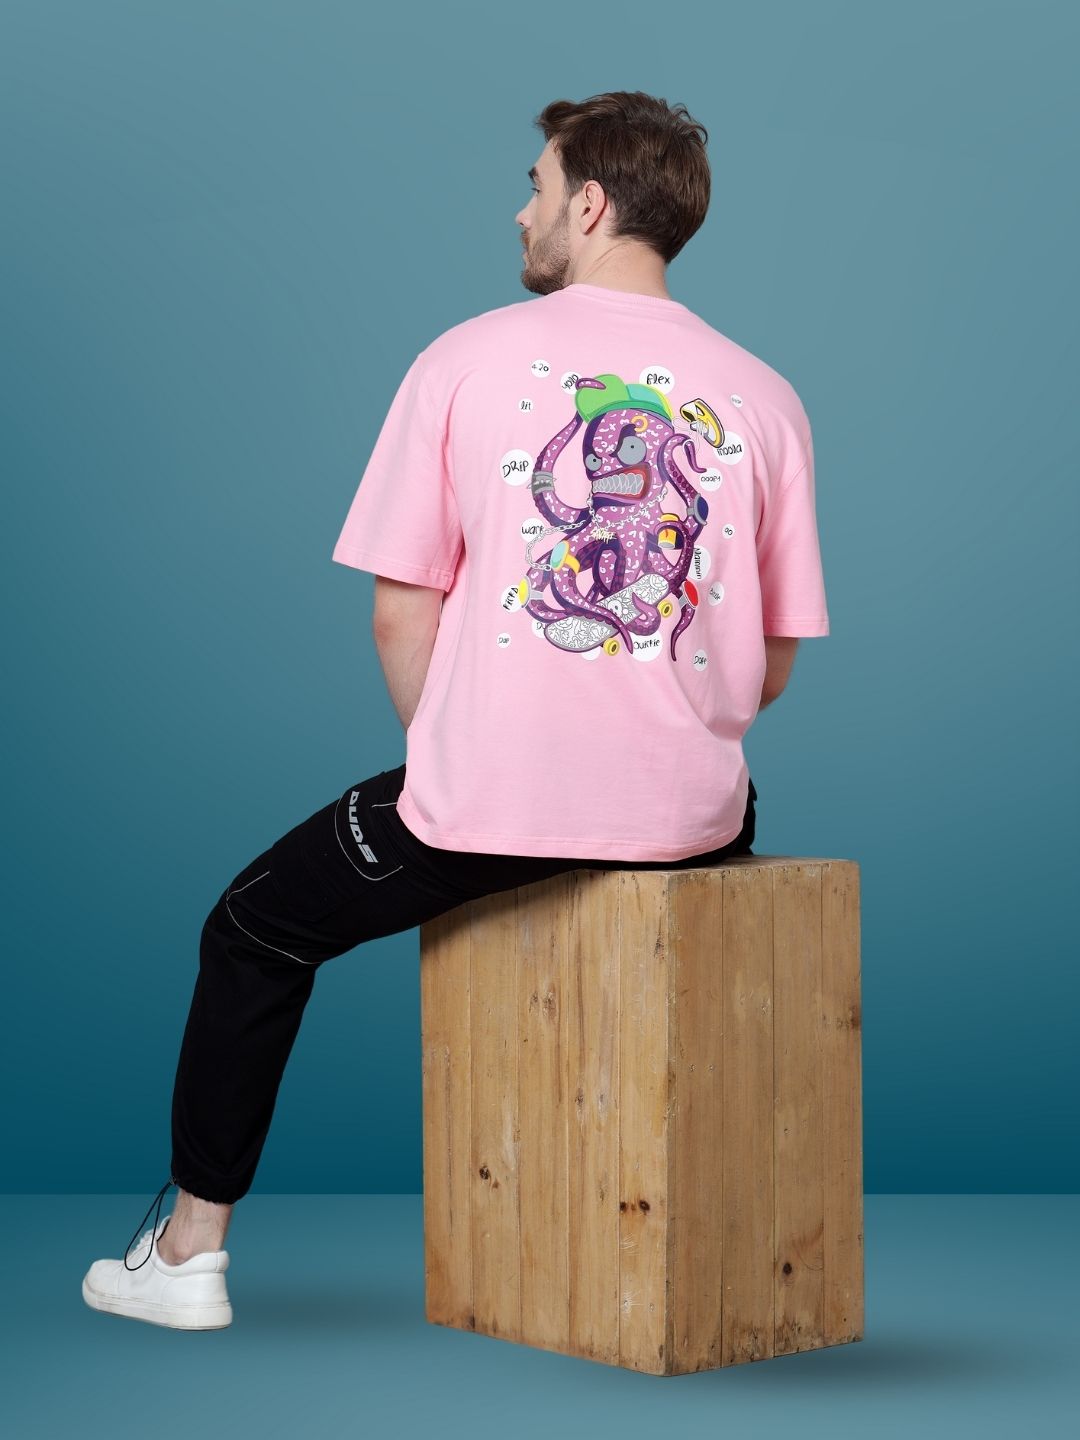 Octopus Over-Sized T-Shirt (Baby Pink) - Wearduds